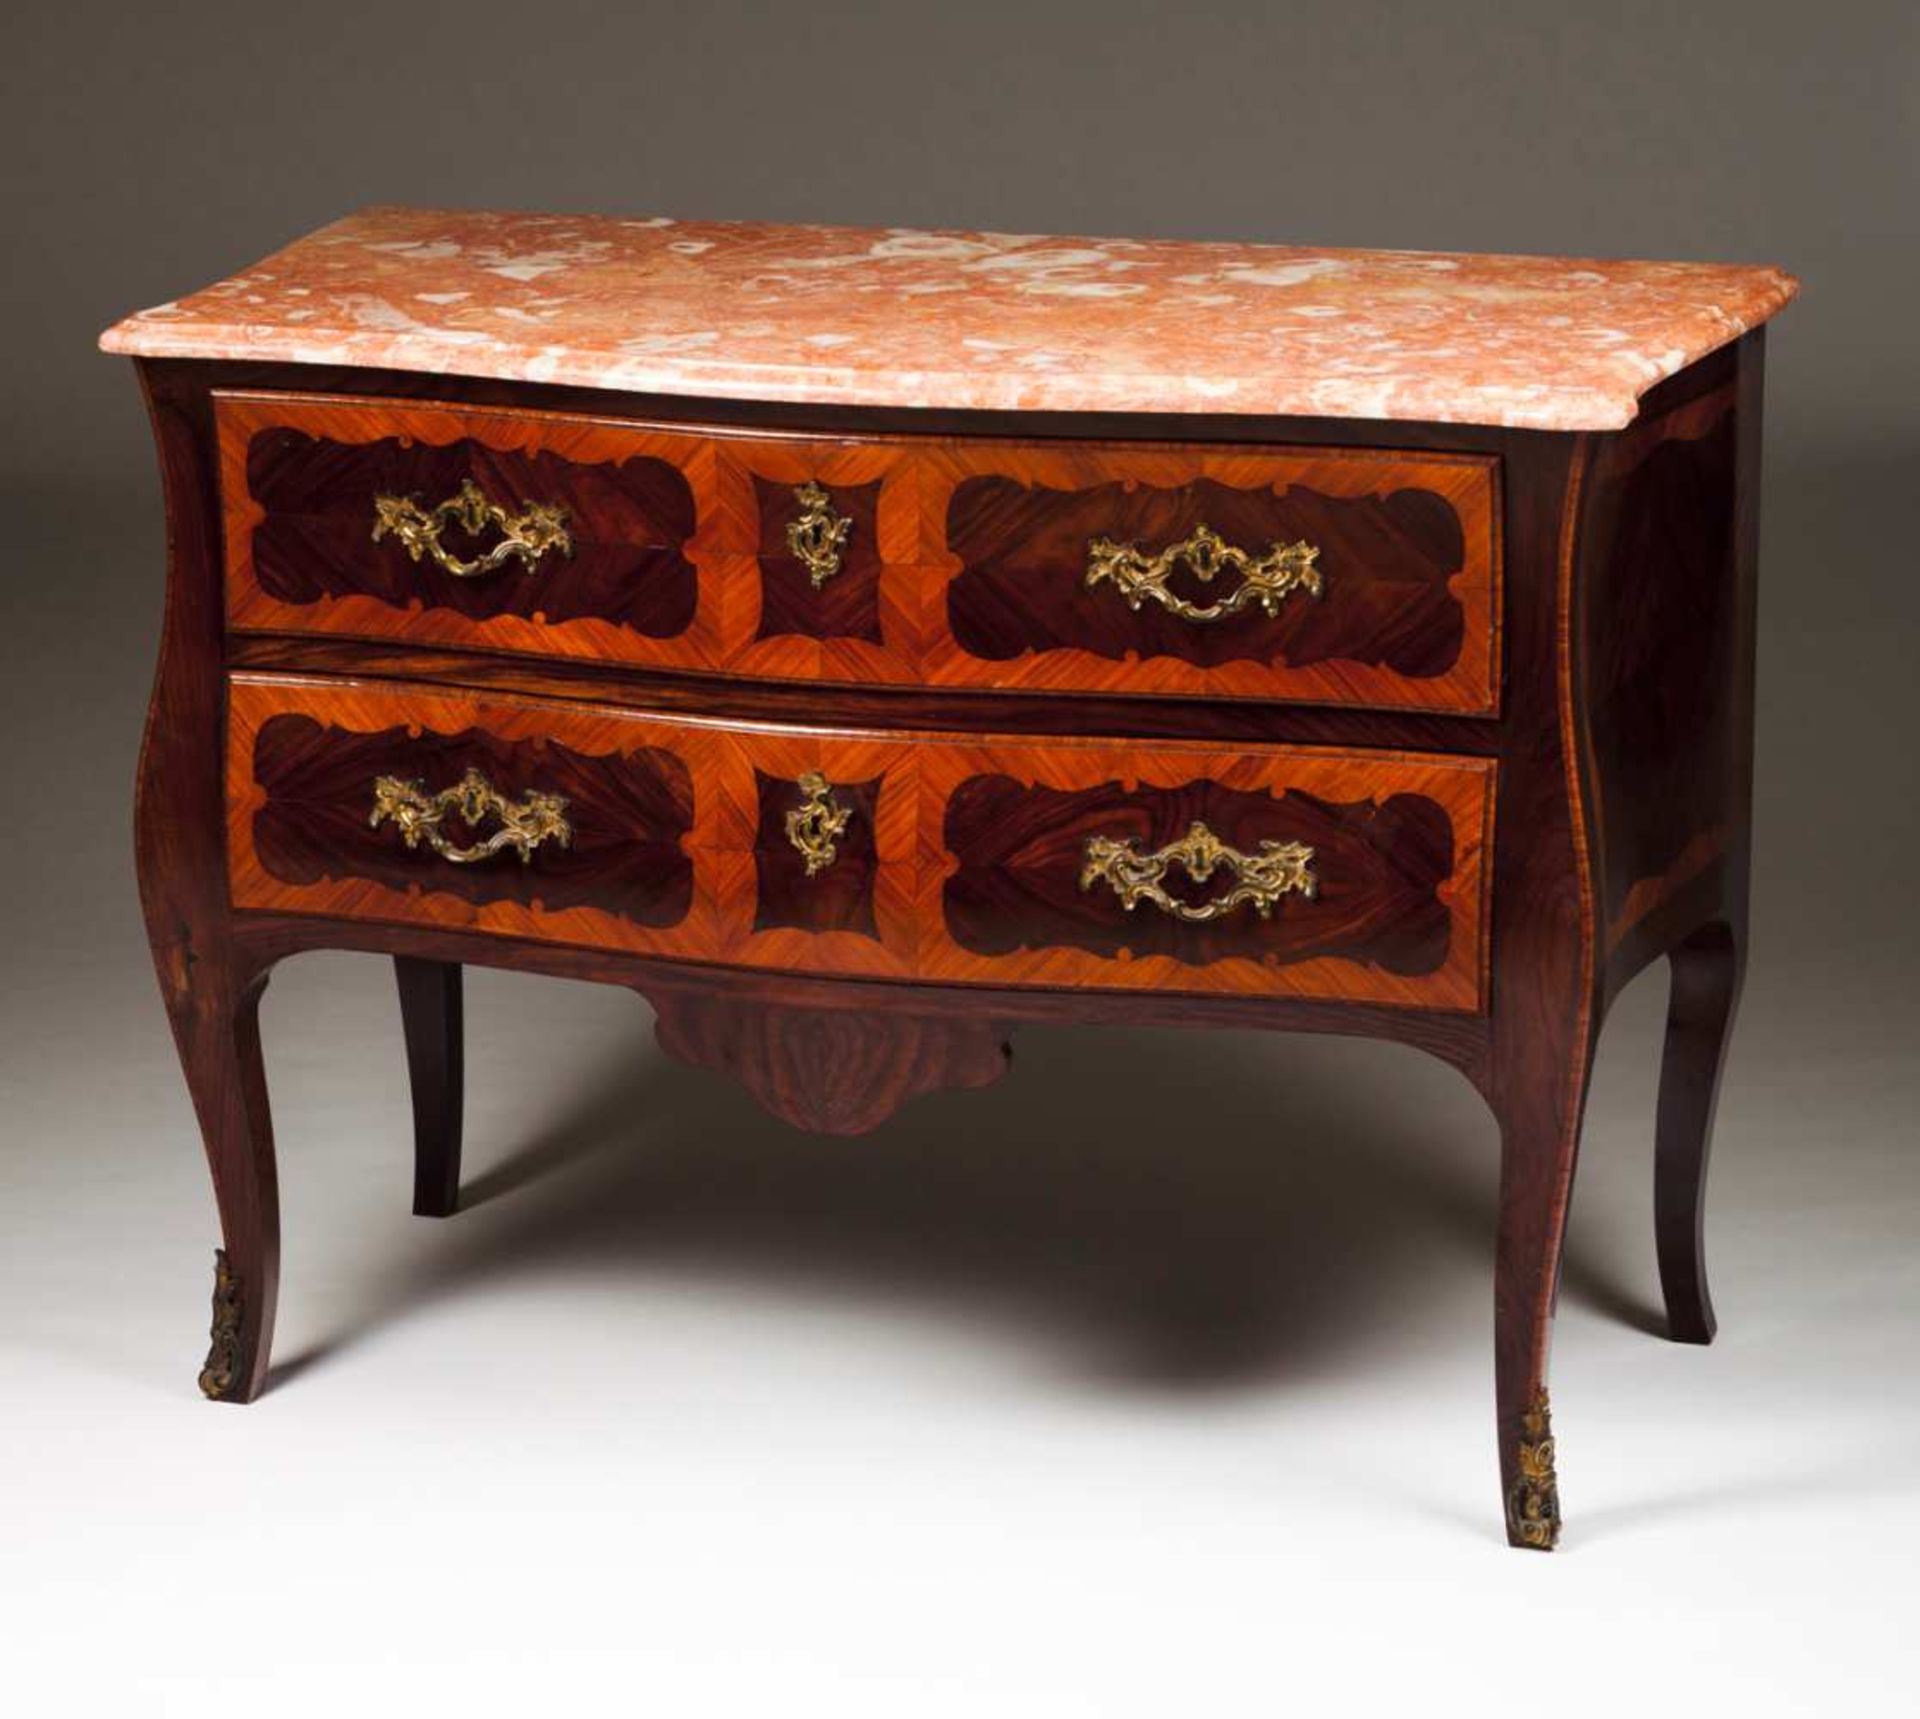 A Louis XV style commode Rosewood with marquetry decoration Two drawers and gilt bronze mounts